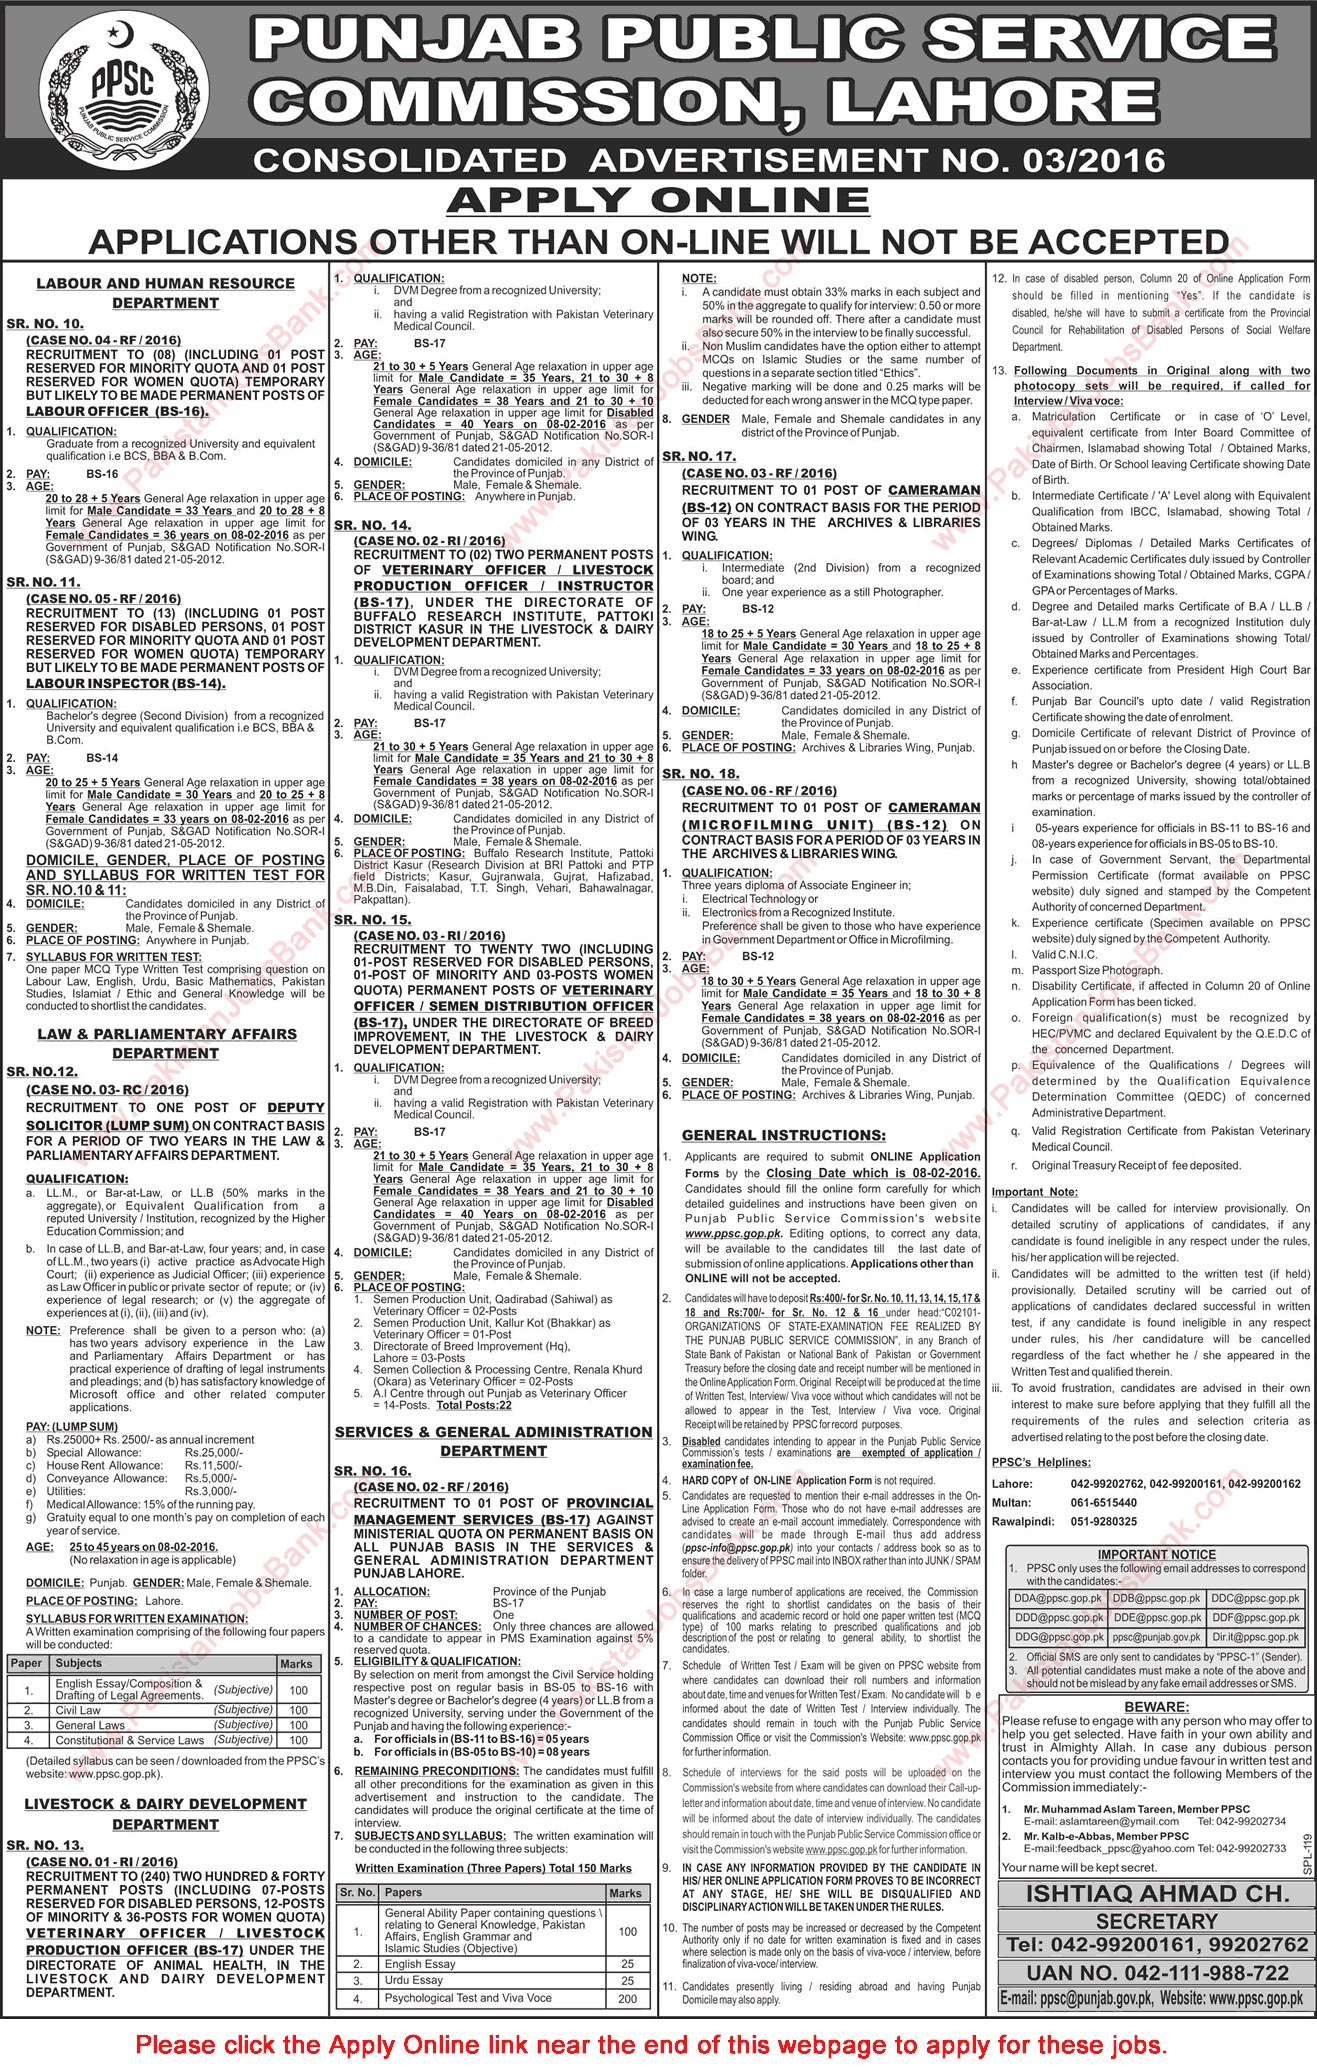 PPSC Jobs January 2016 February Consolidated Advertisement No 03/2016 3/2016 Apply Online Latest